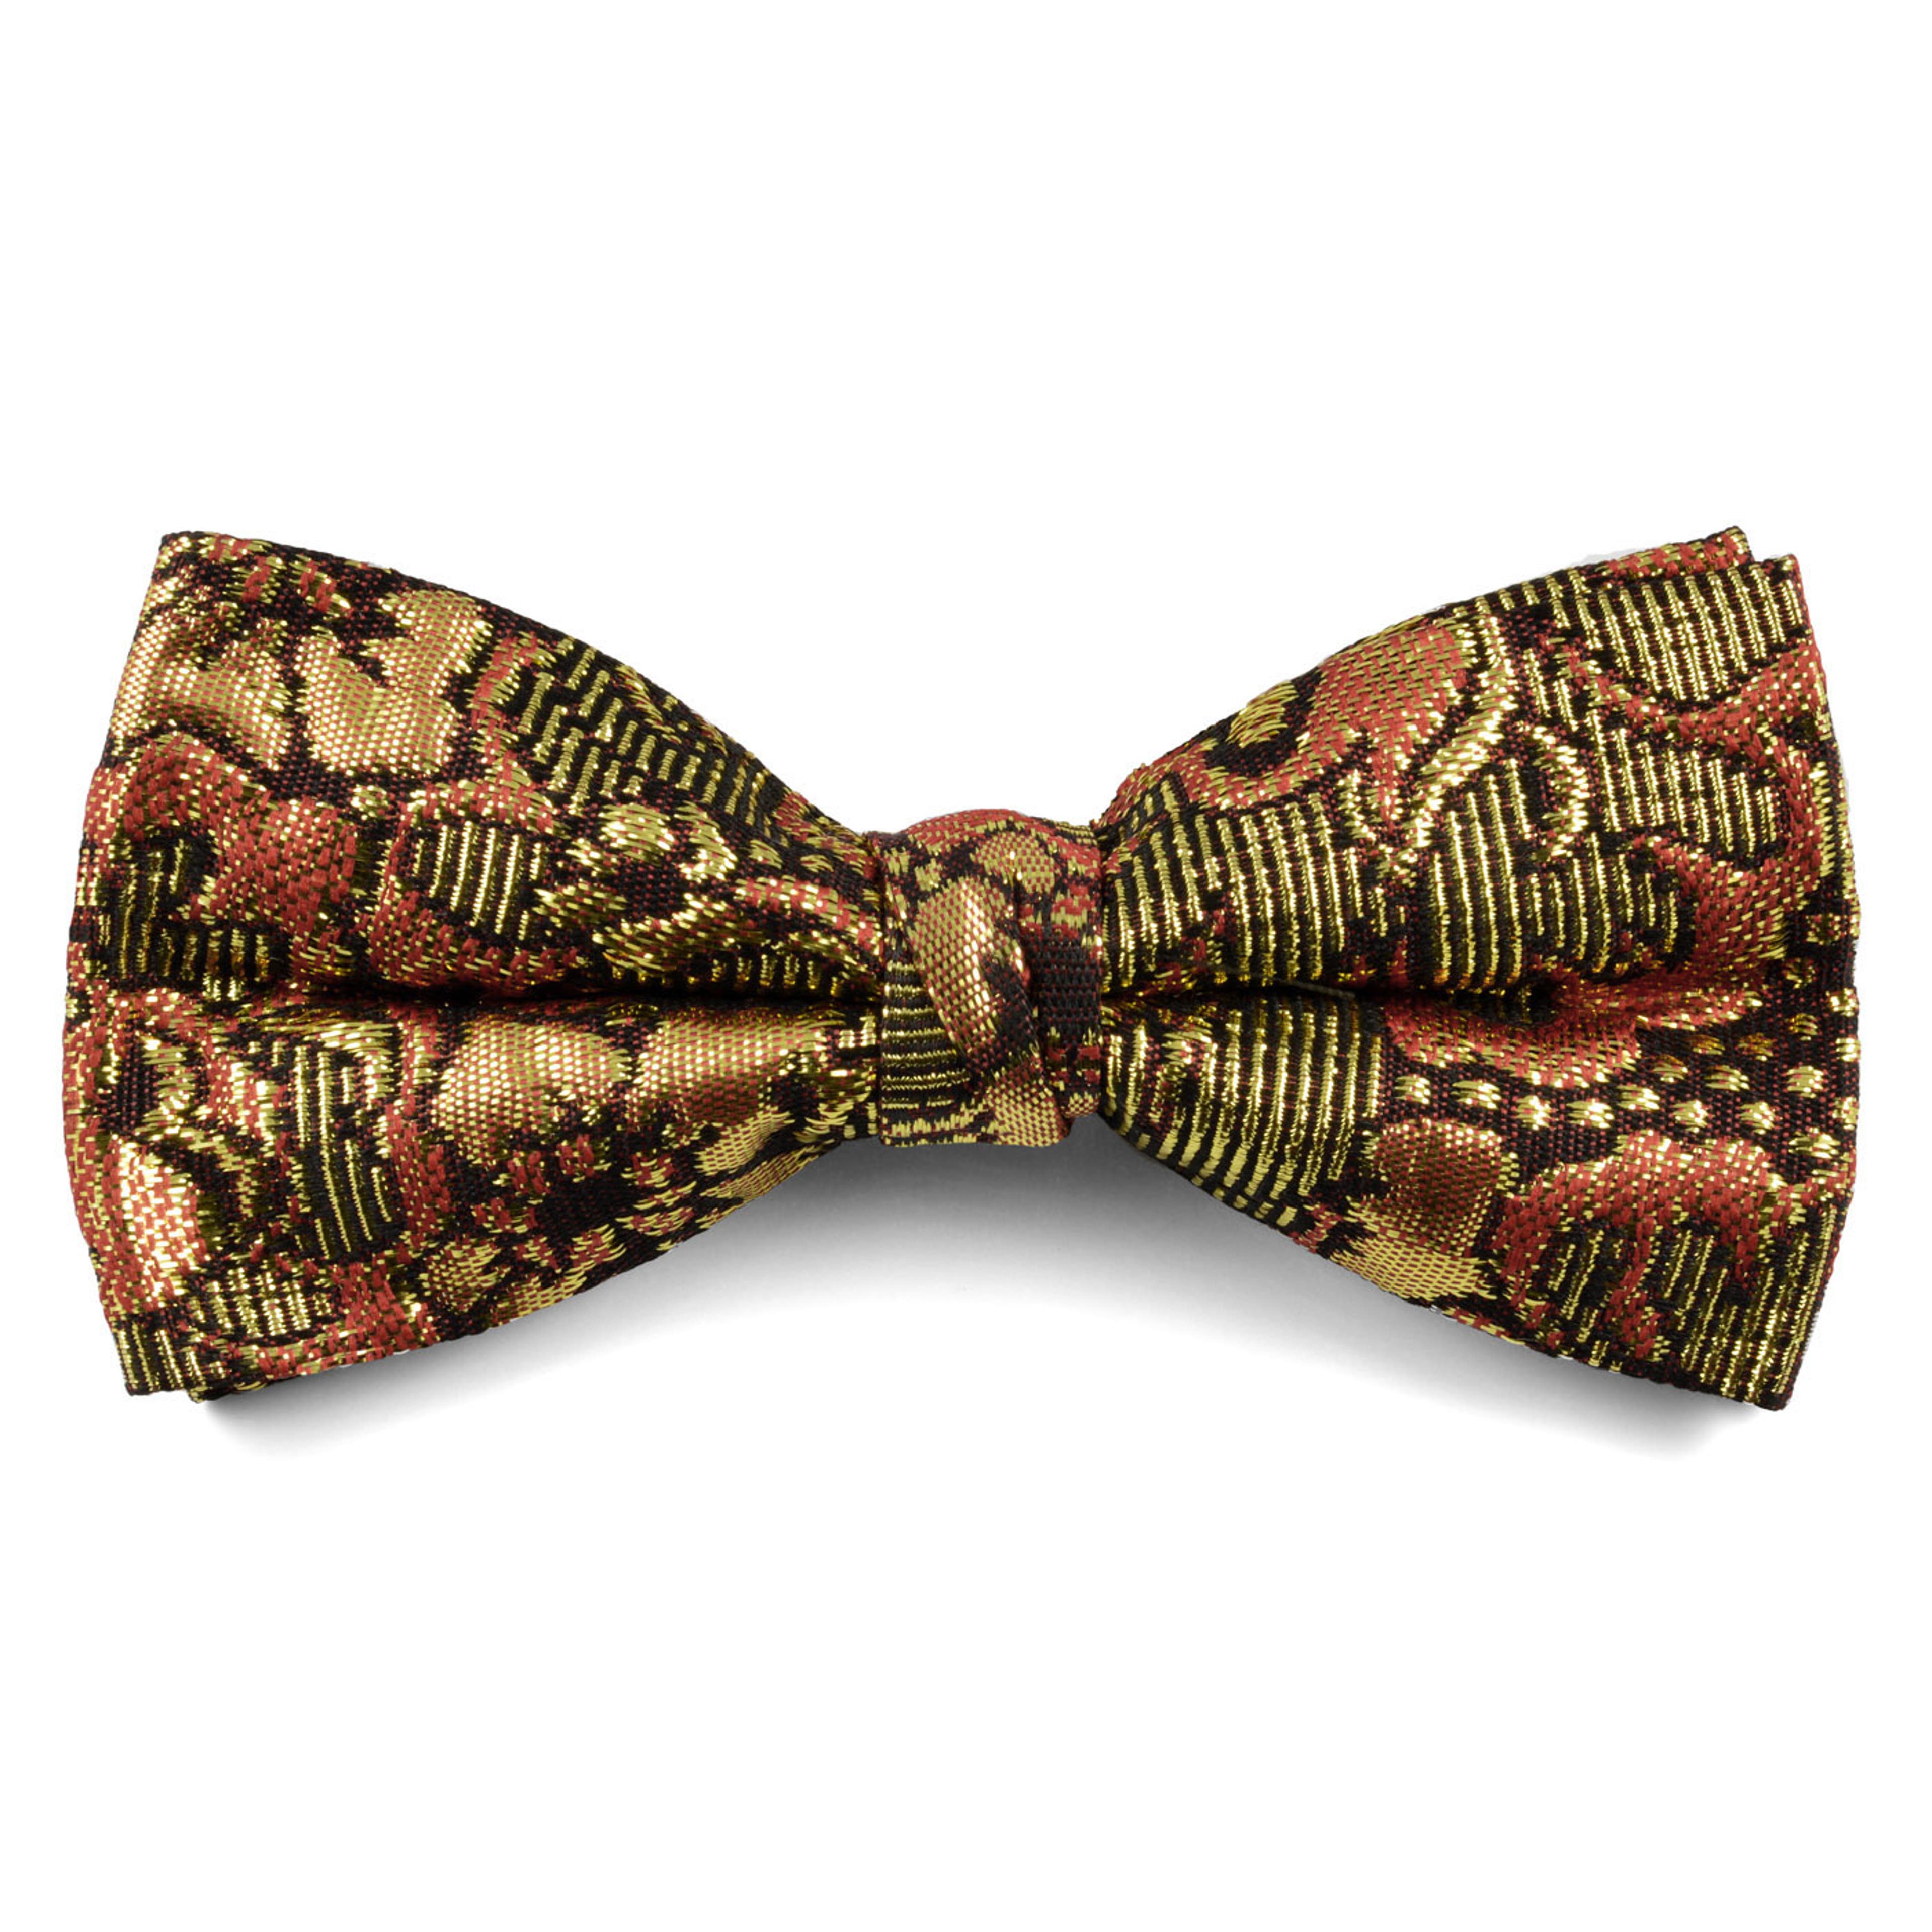 Gold Patterned Pre-Tied Bow Tie